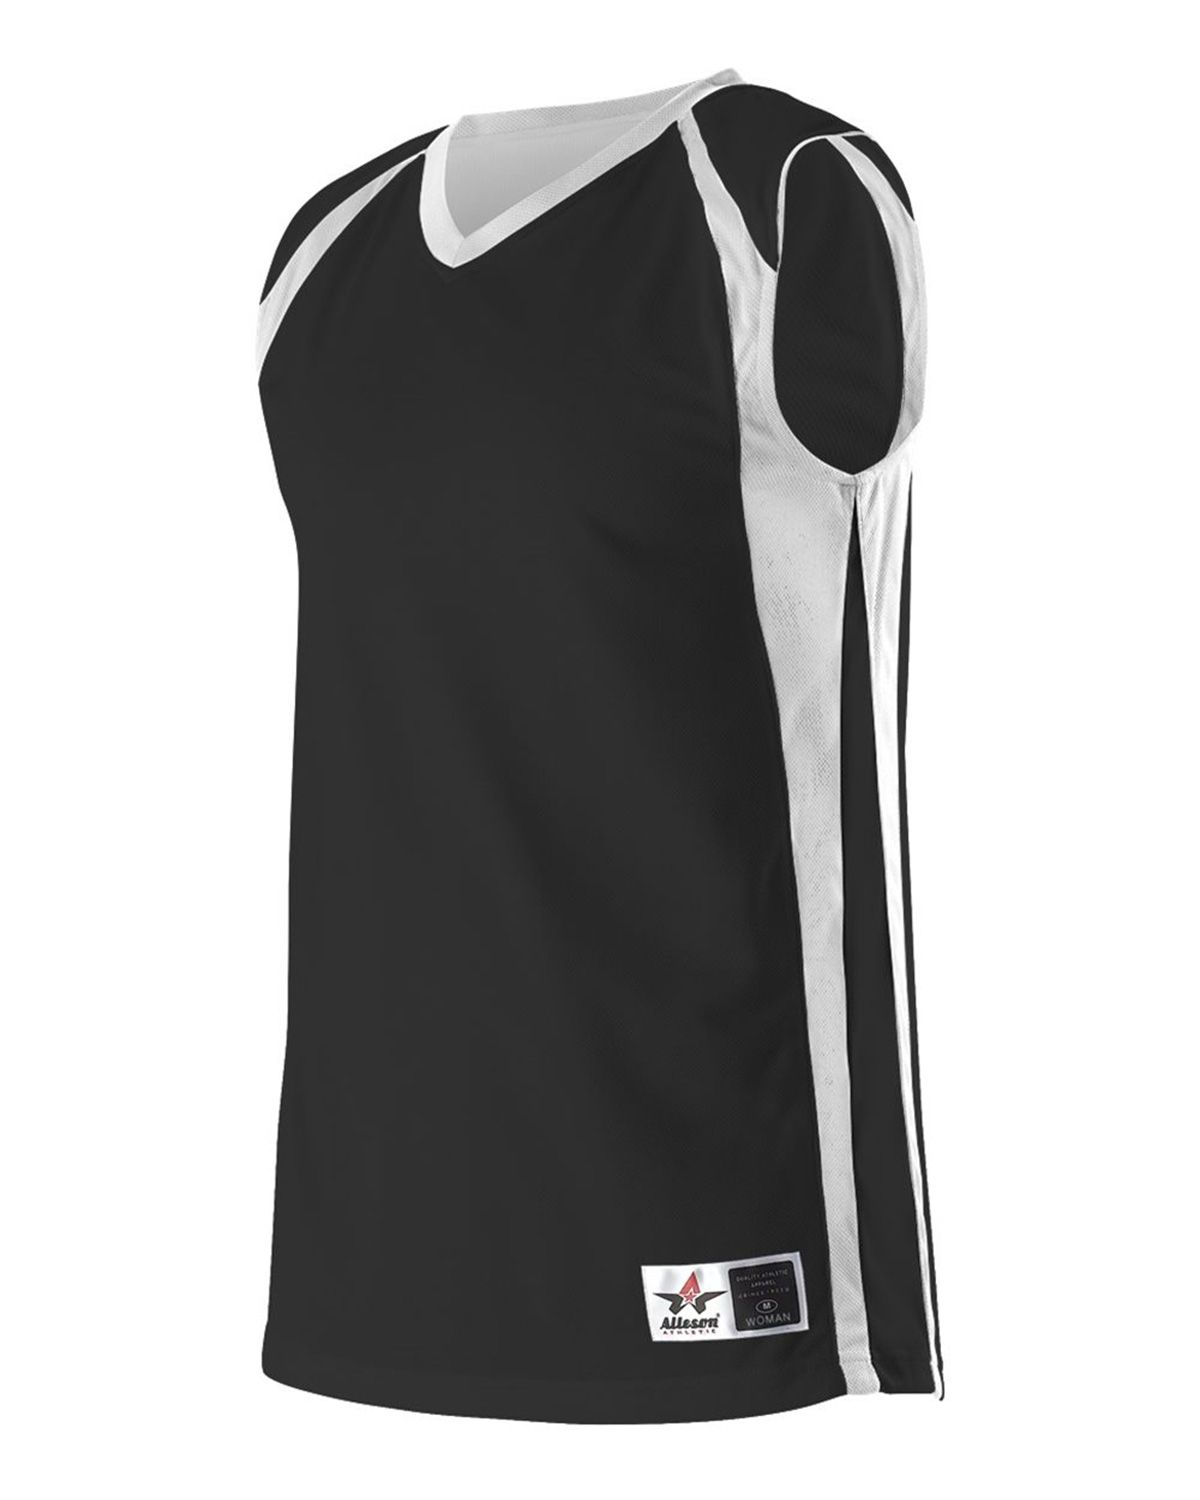 black and white reversible basketball jersey